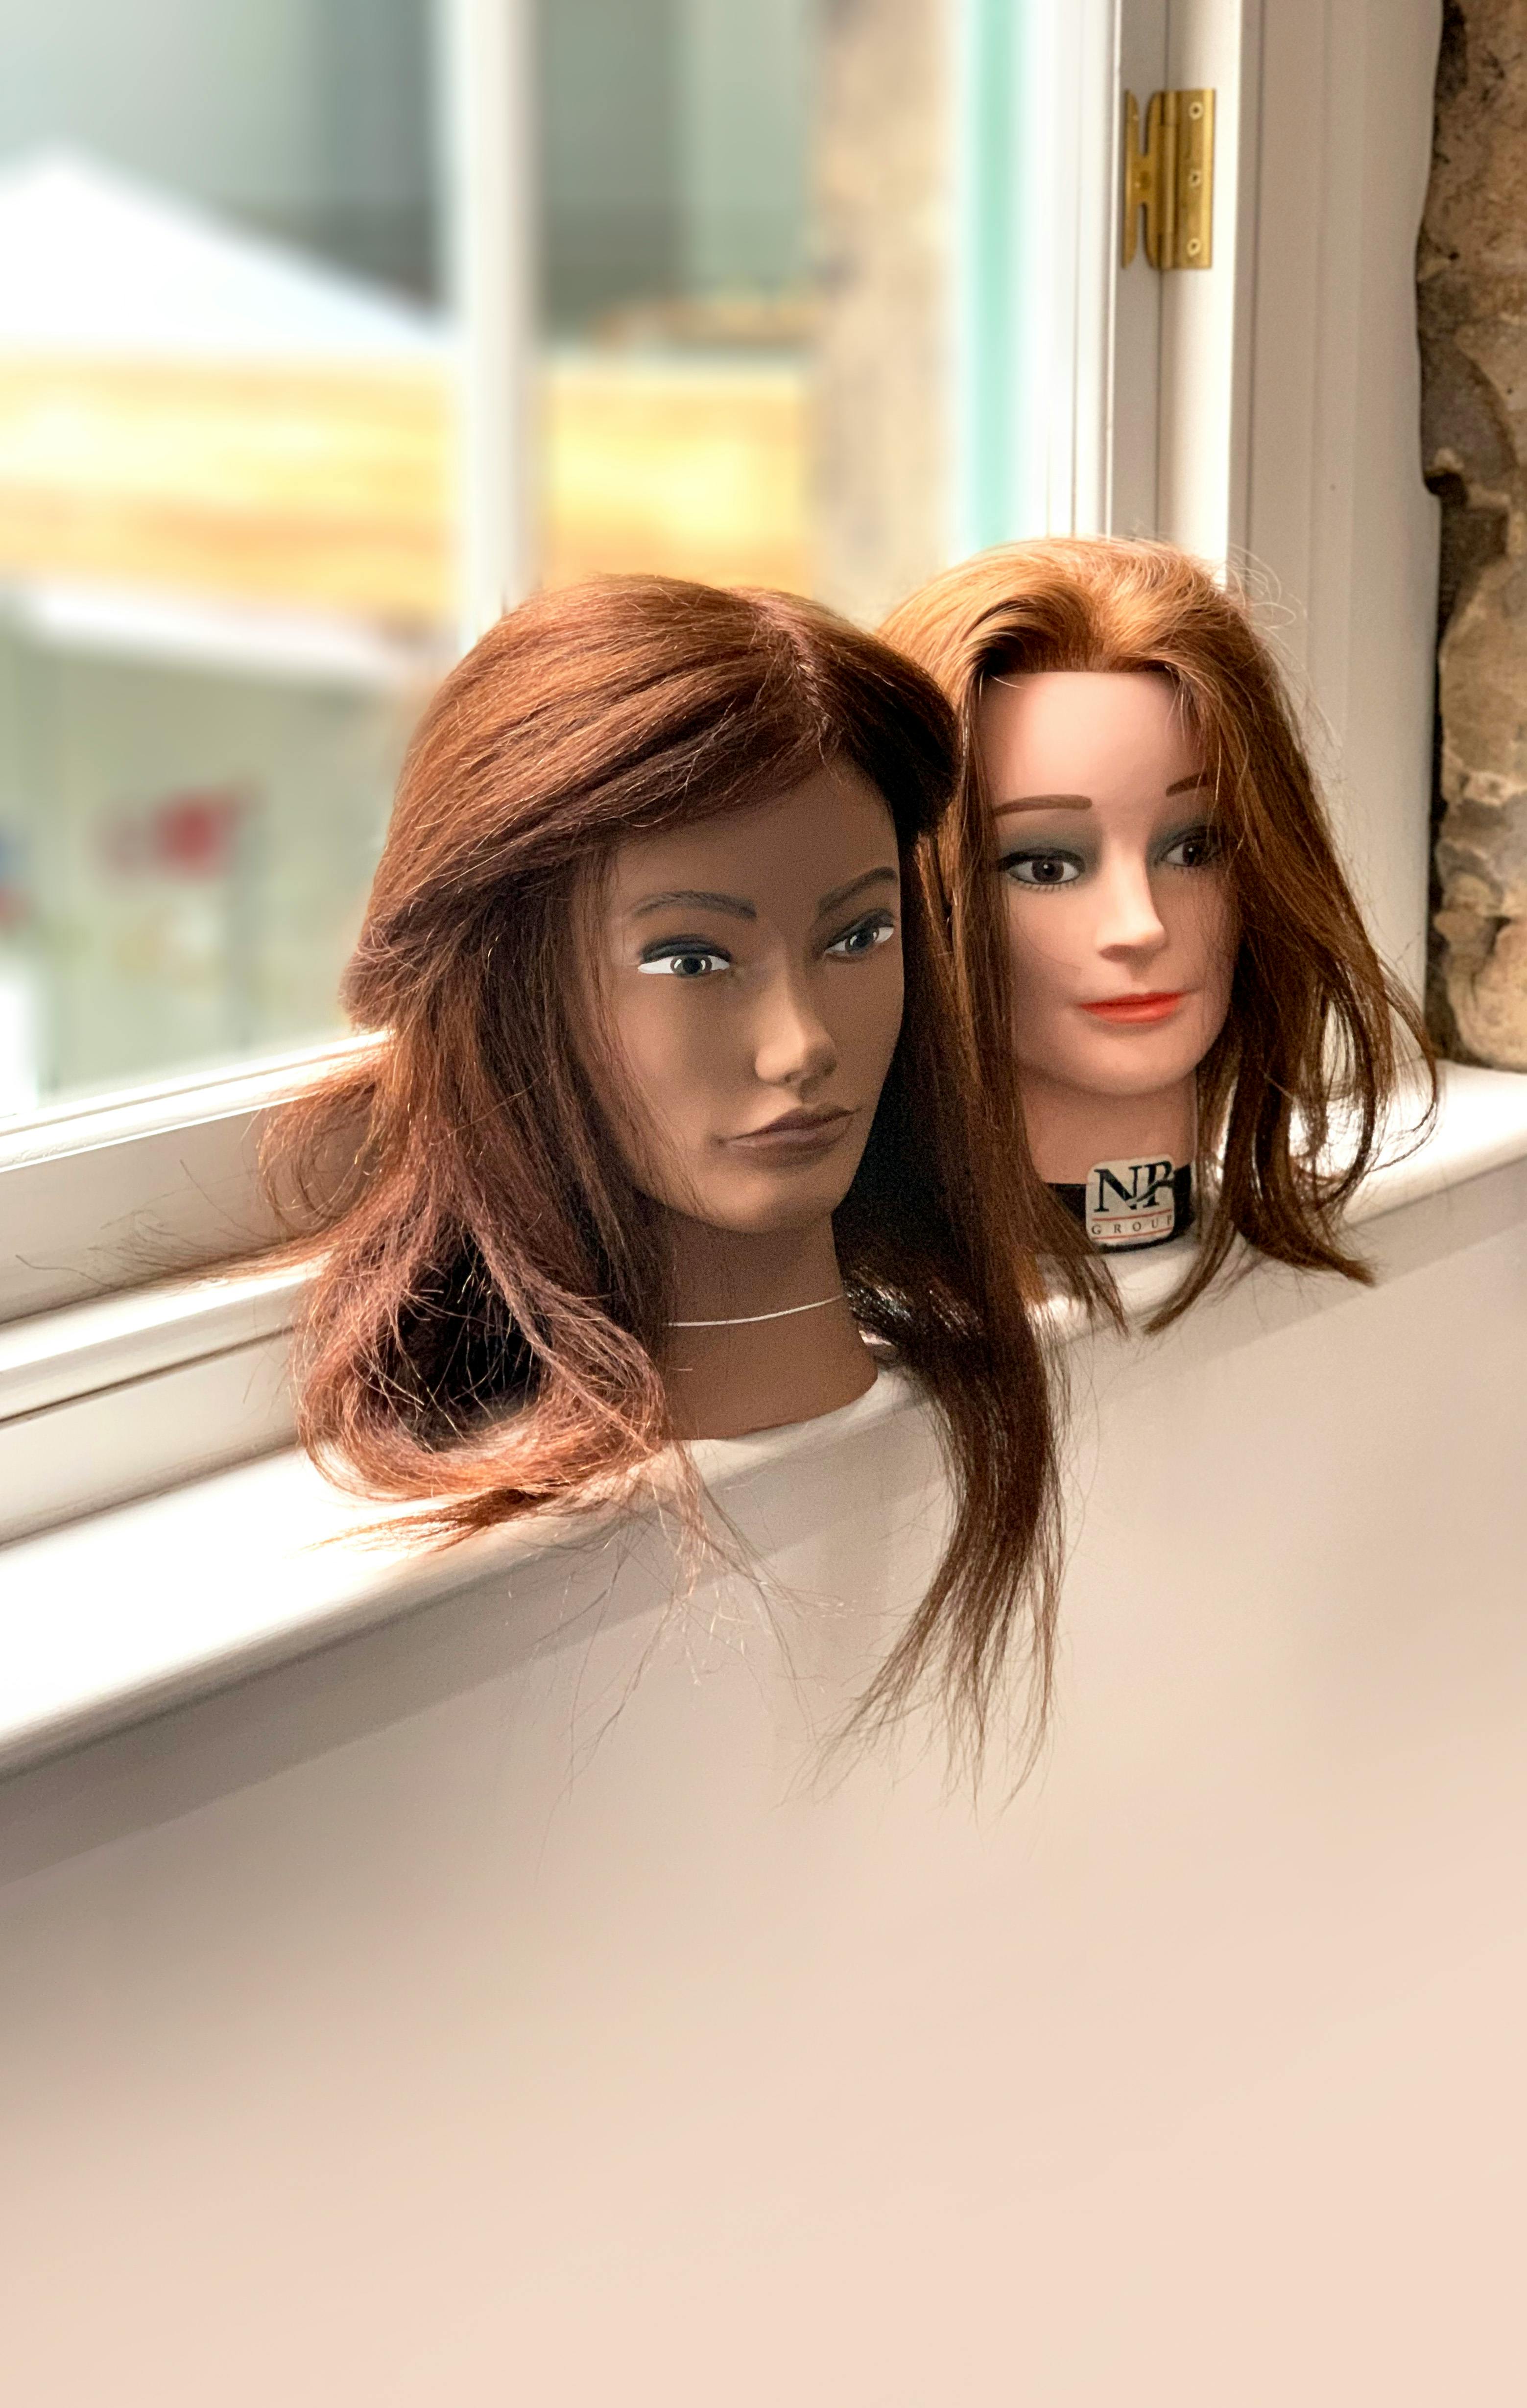 Mannequin Head With Long Blond Wig Stock Photo - Download Image